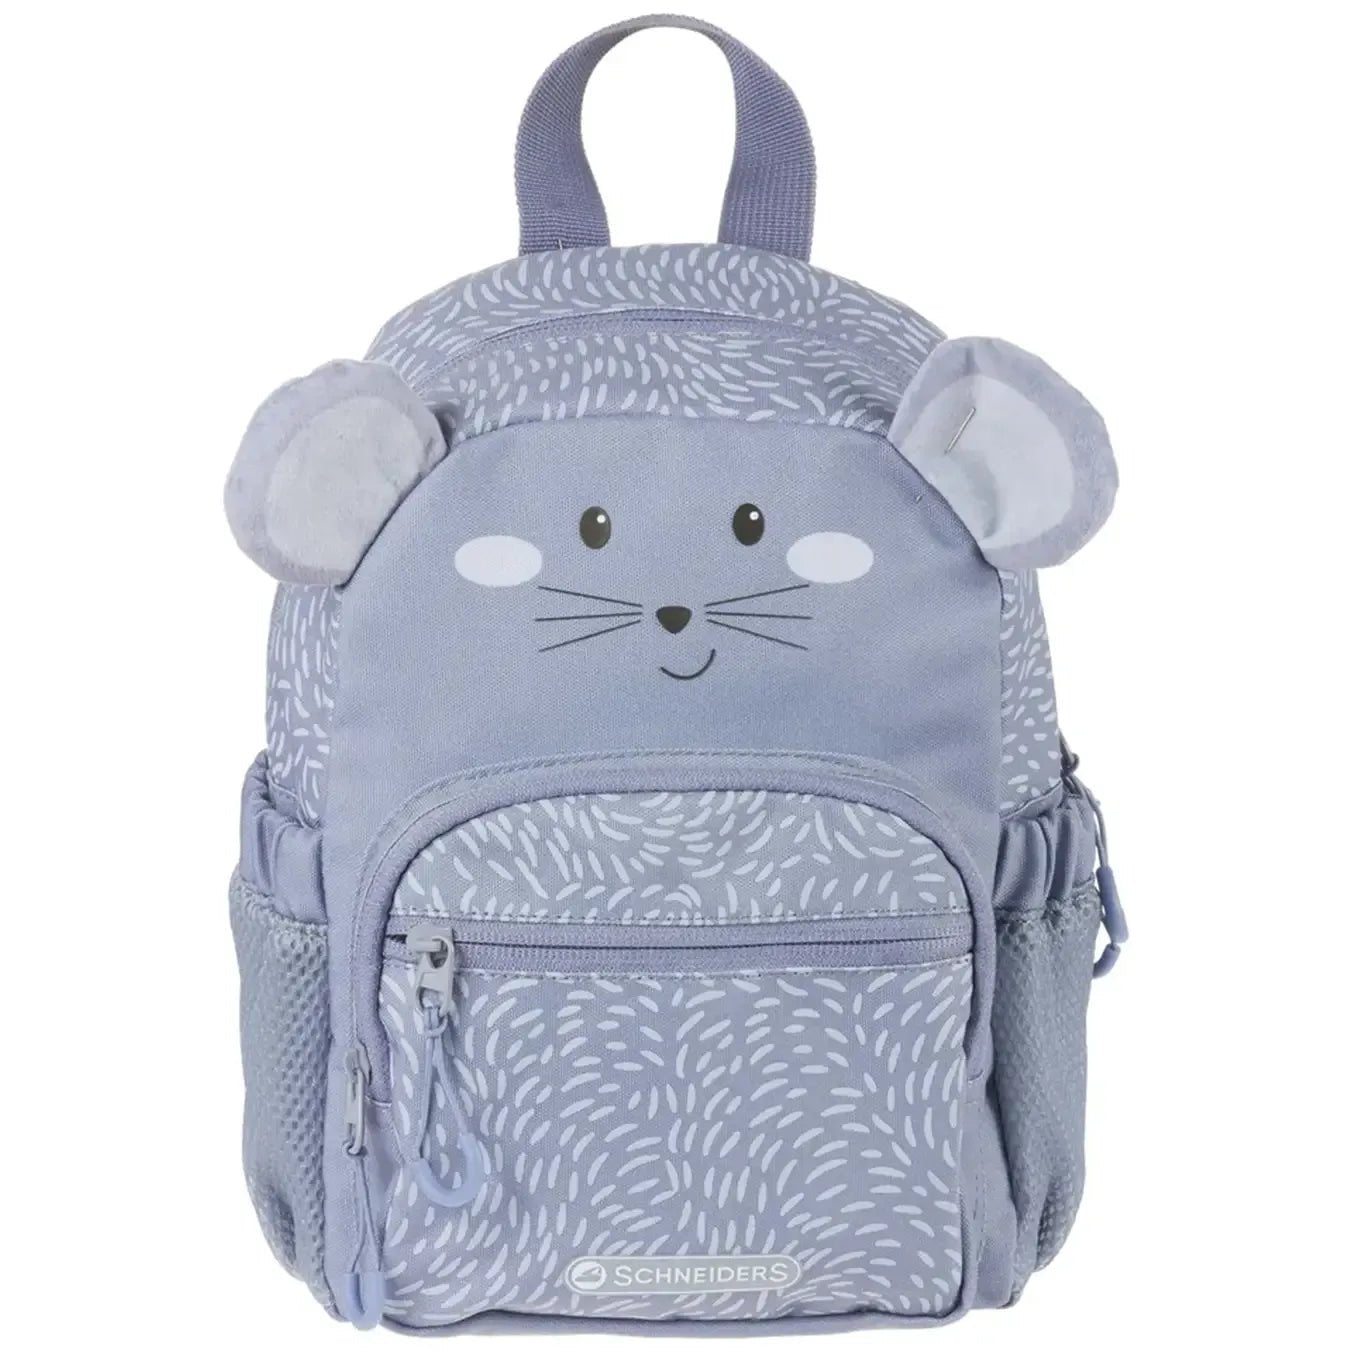 Schneiders Bags Mouse Kids Backpack 27 cm - Lilac